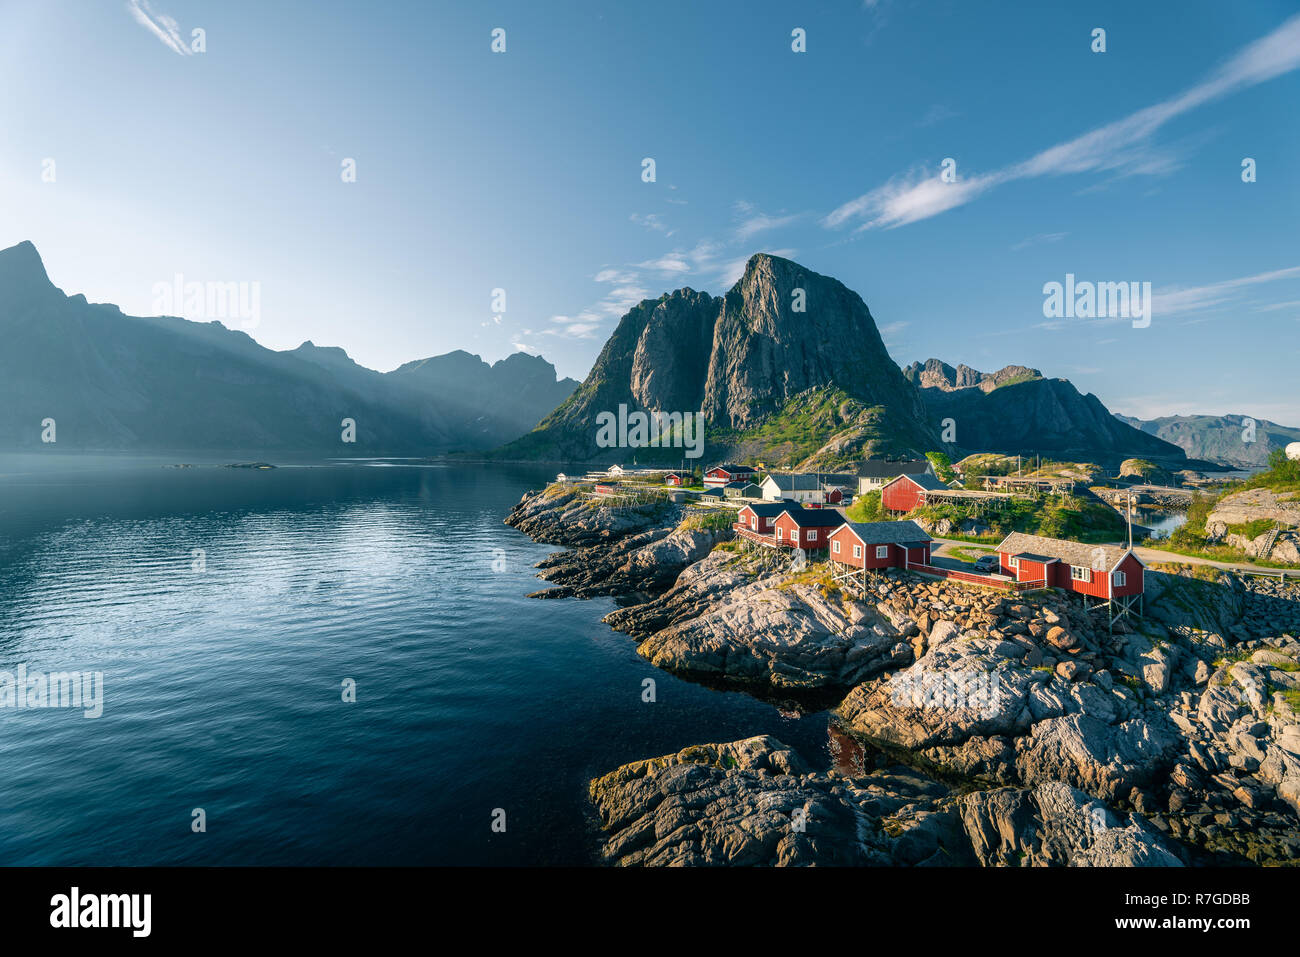 Red rorbu huts by an calm ocean at sunny summer evening in Lofoten islands, Reine, Norway Stock Photo